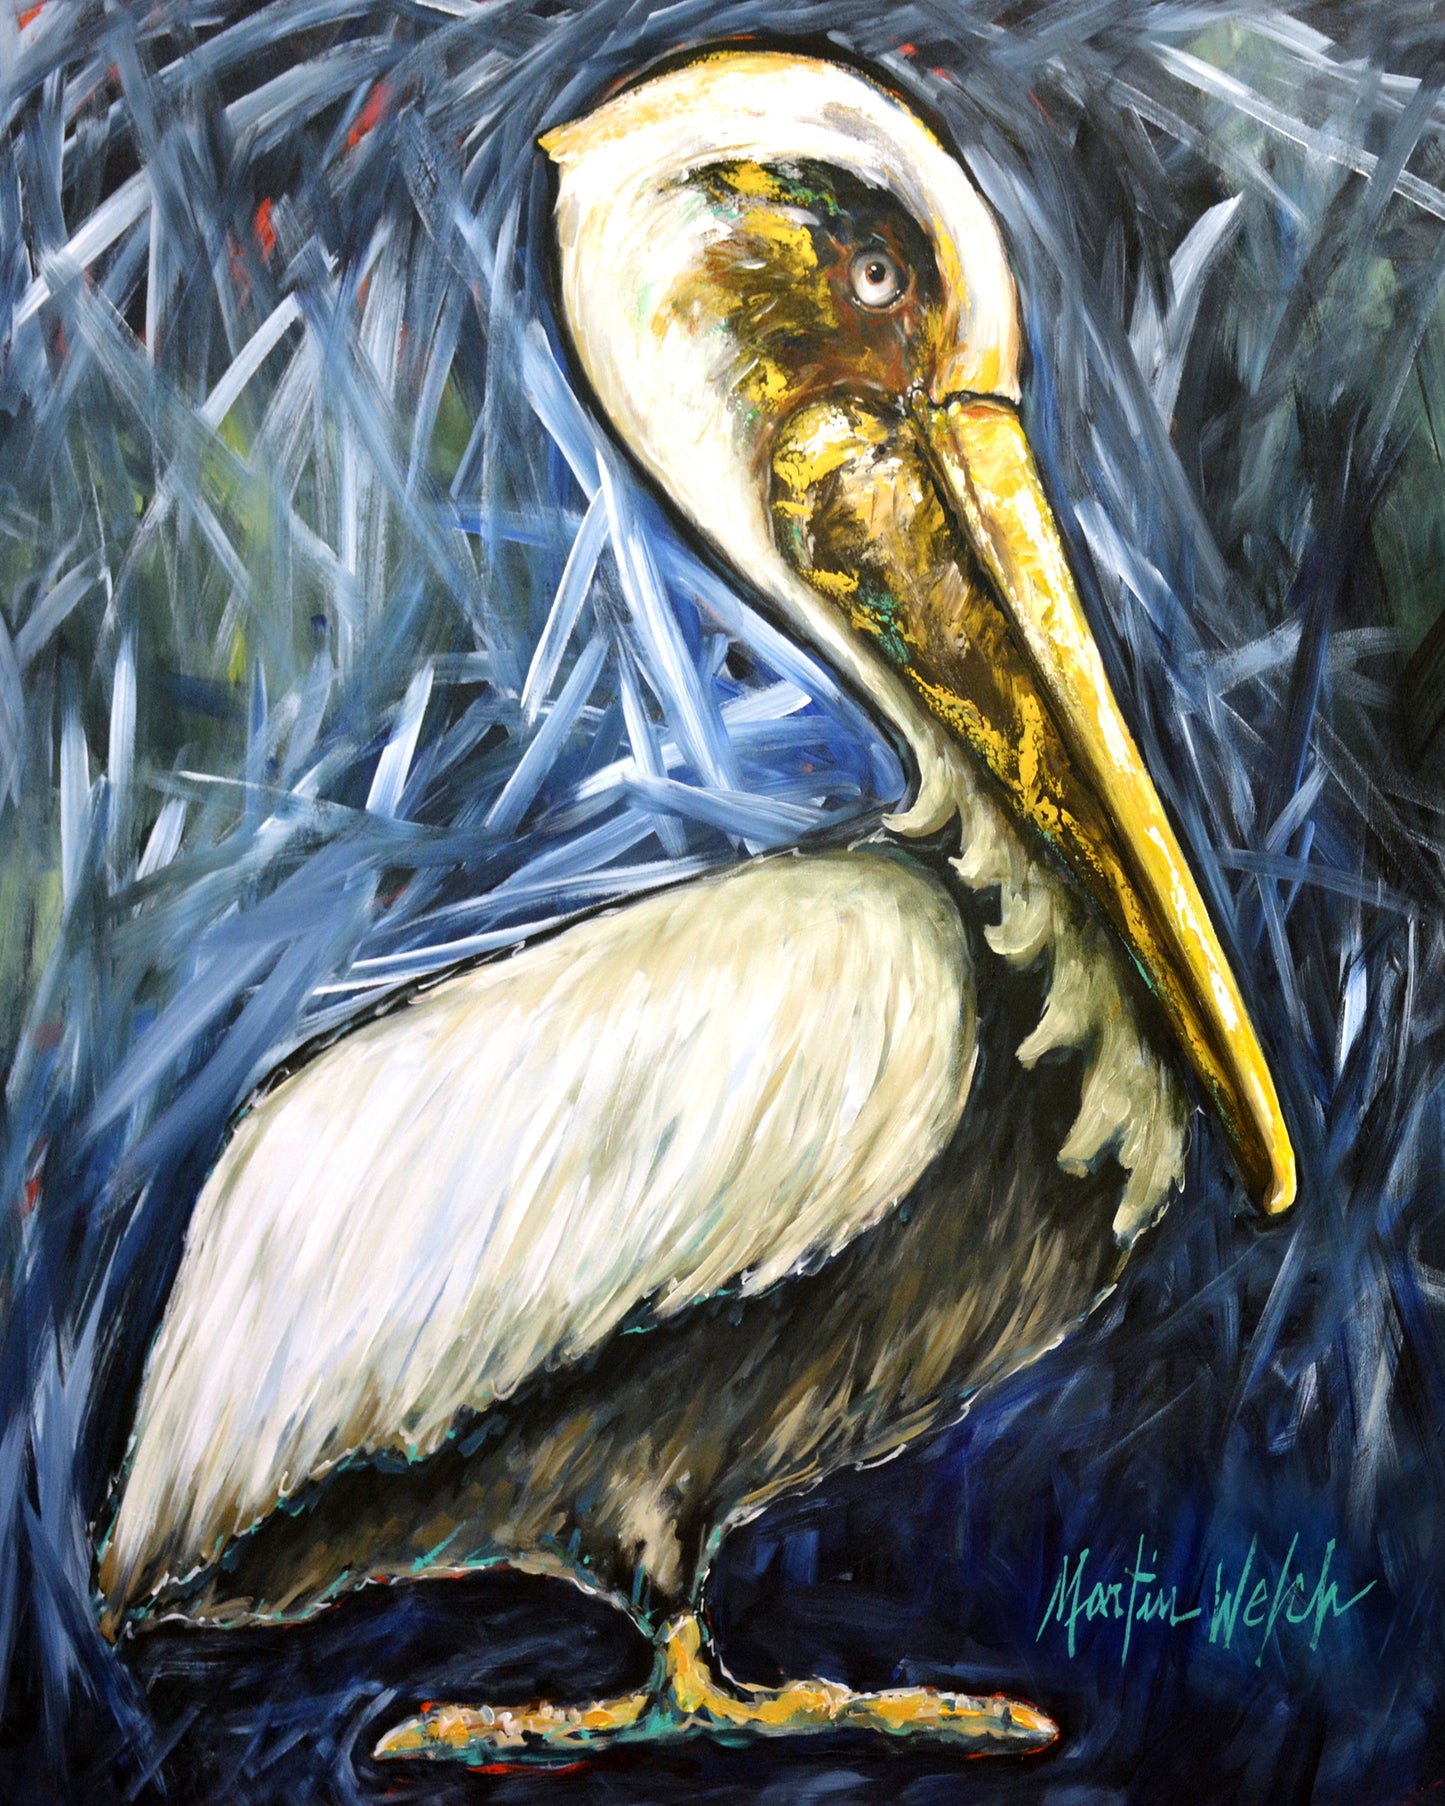 Here's Looking At You - Pelican - 11"x14" Print